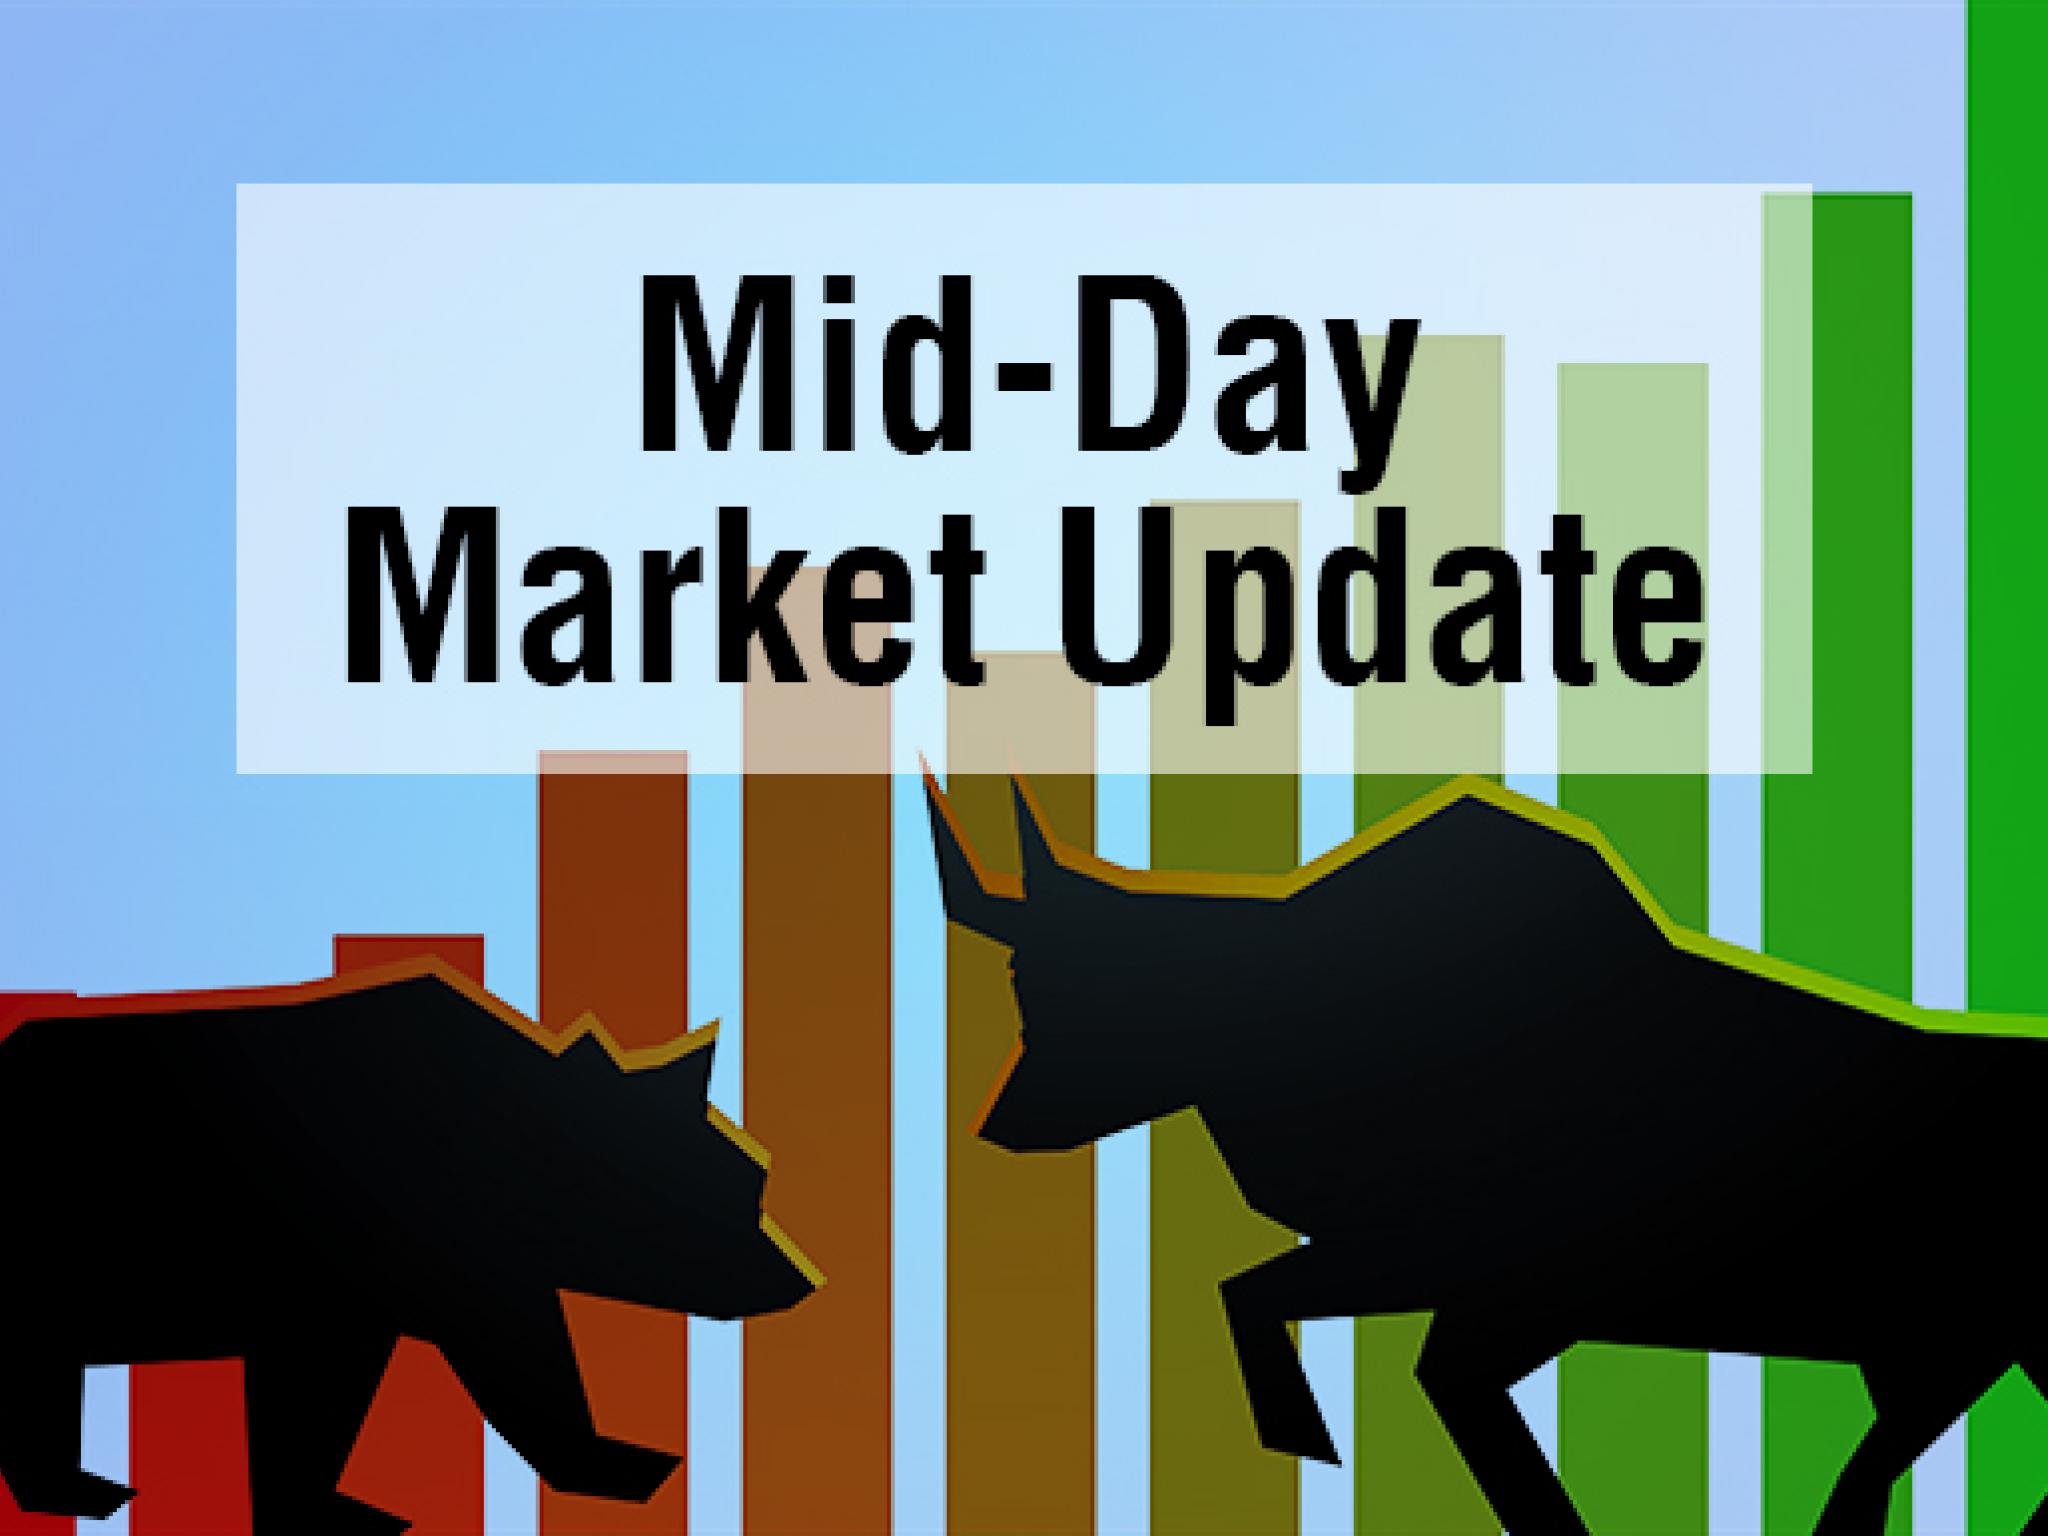  mid-day-market-update-crude-oil-down-4-us-producer-prices-rise-1-in-january 